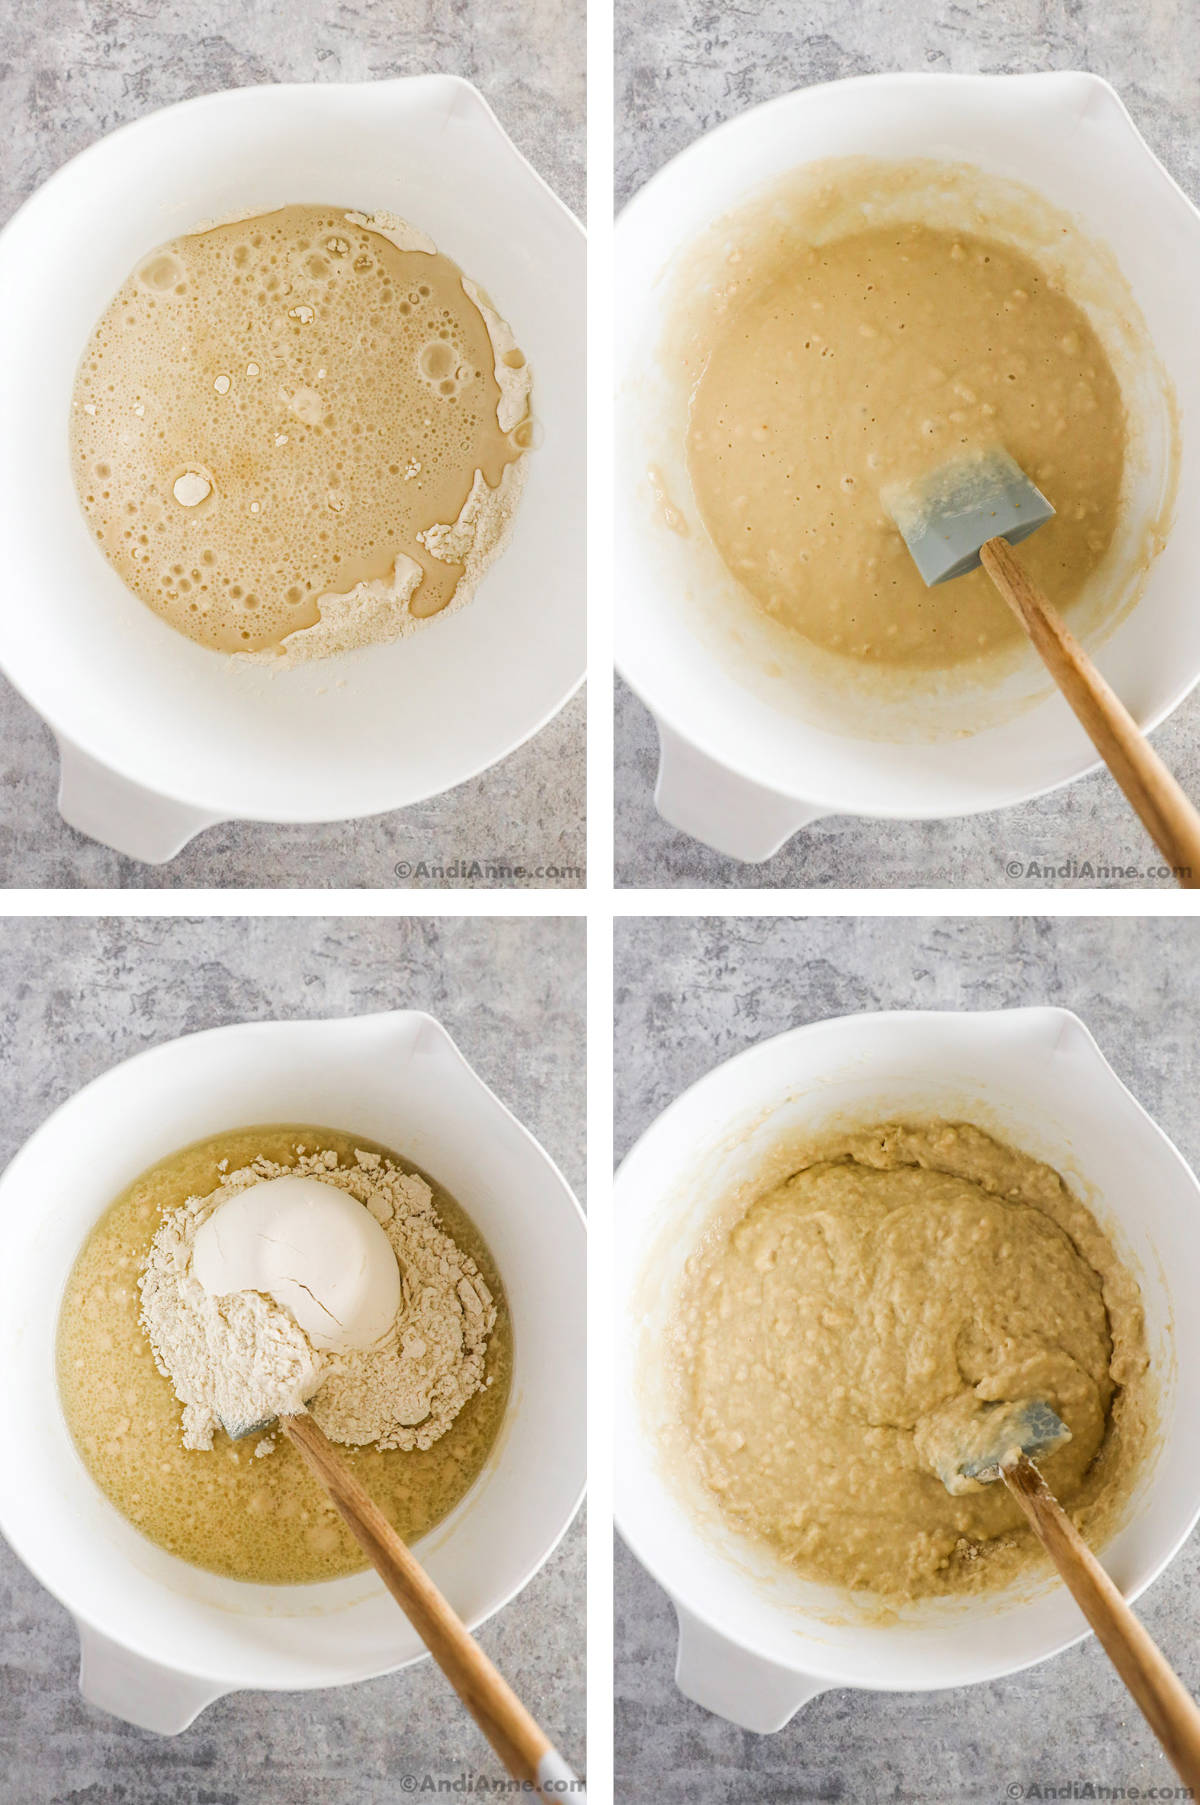 One image containing four overhead images. 1. White bowl with all ingredients and unmixed flour inside. 2. White bowl with mixed flour inside.
3. White bowl with ingredients and one more cup of flour added, unmixed. 4. The 1 cup of flour is mixed in.  